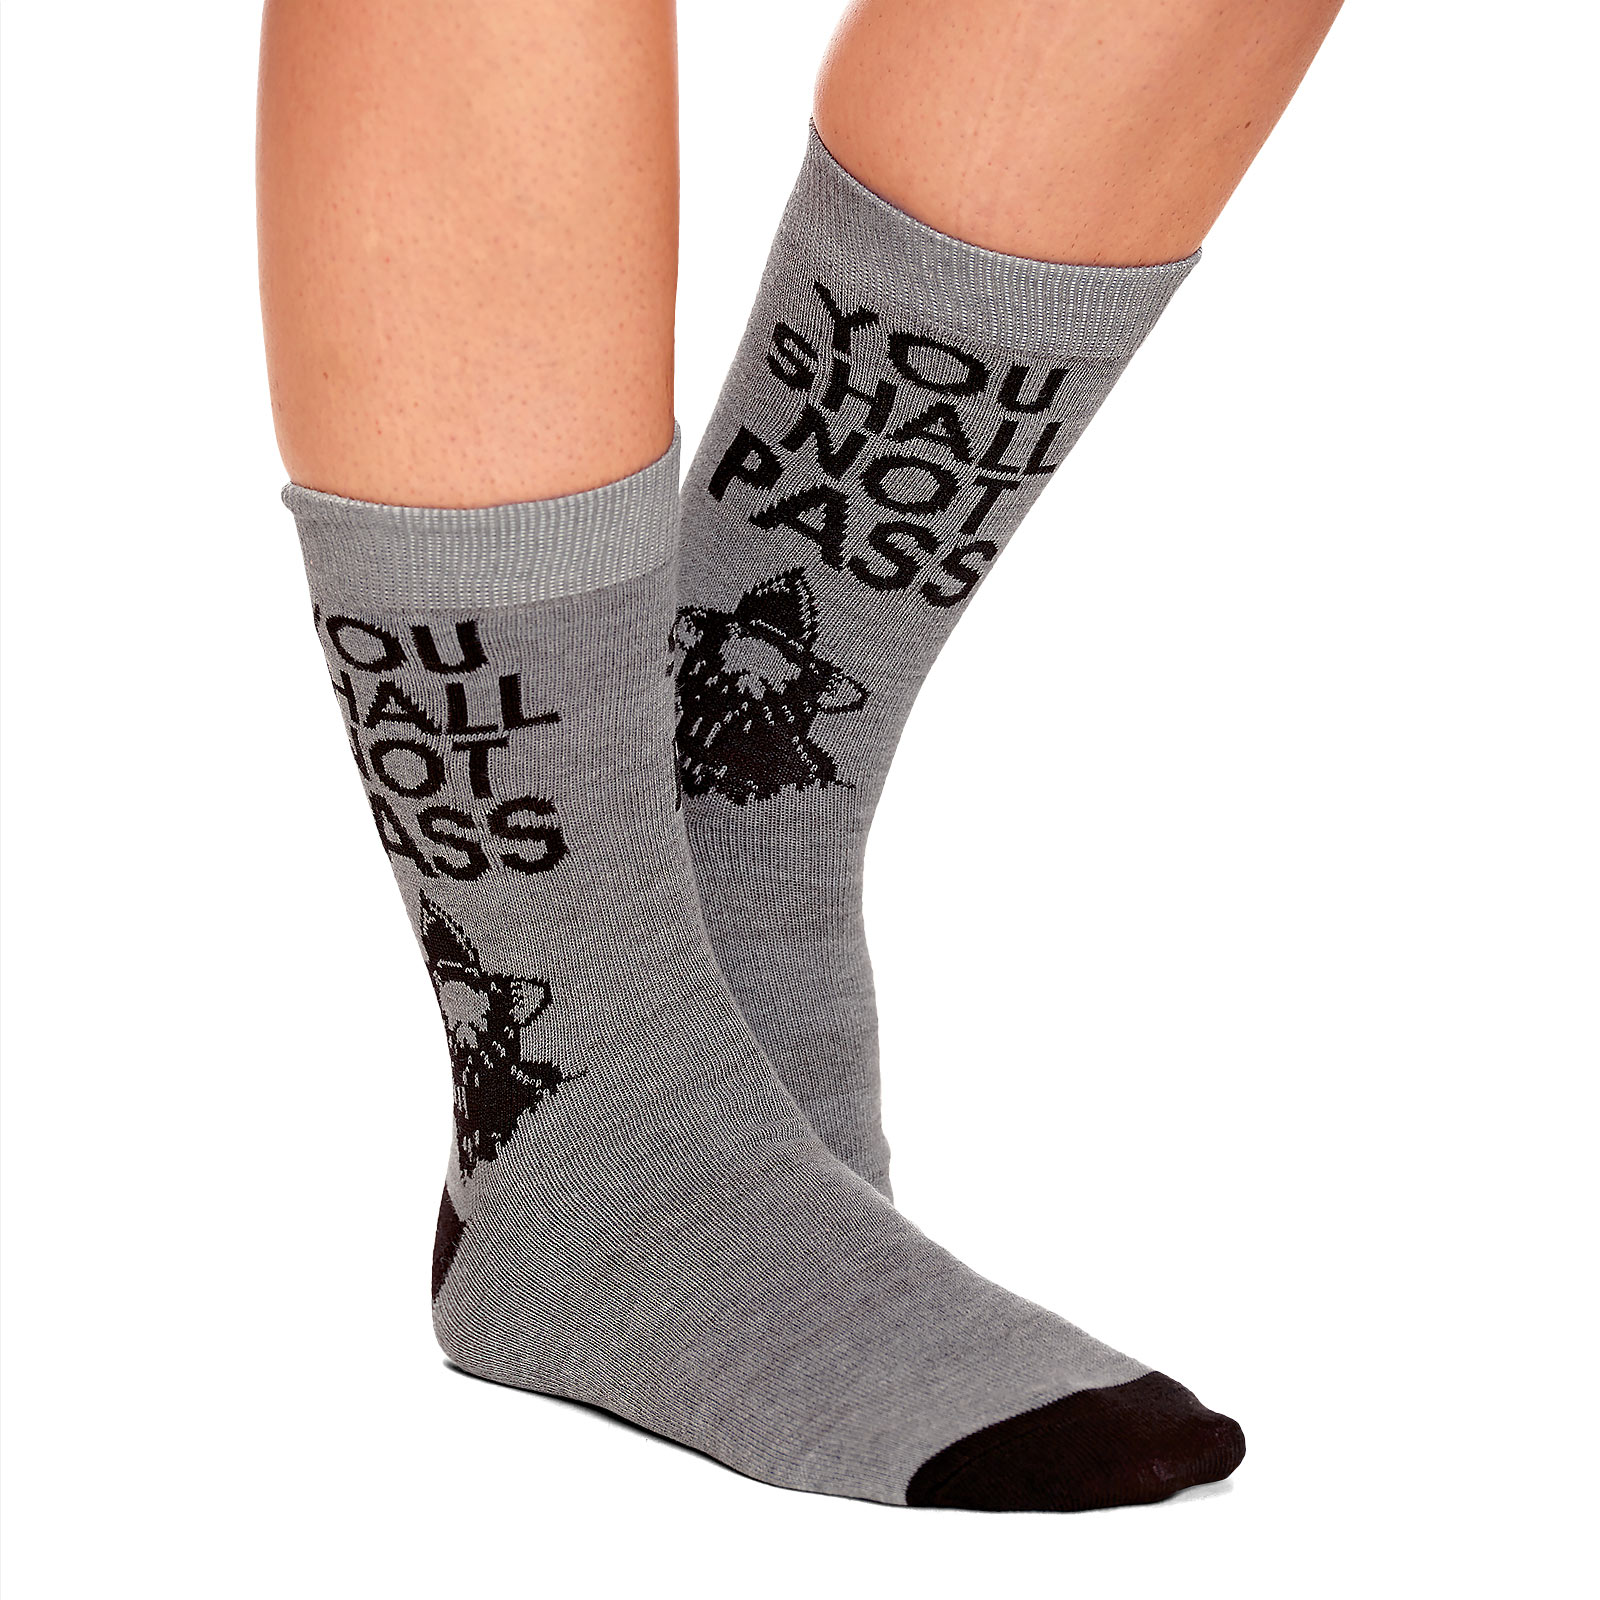 Lord of the Rings - You Shall Not Pass Socks